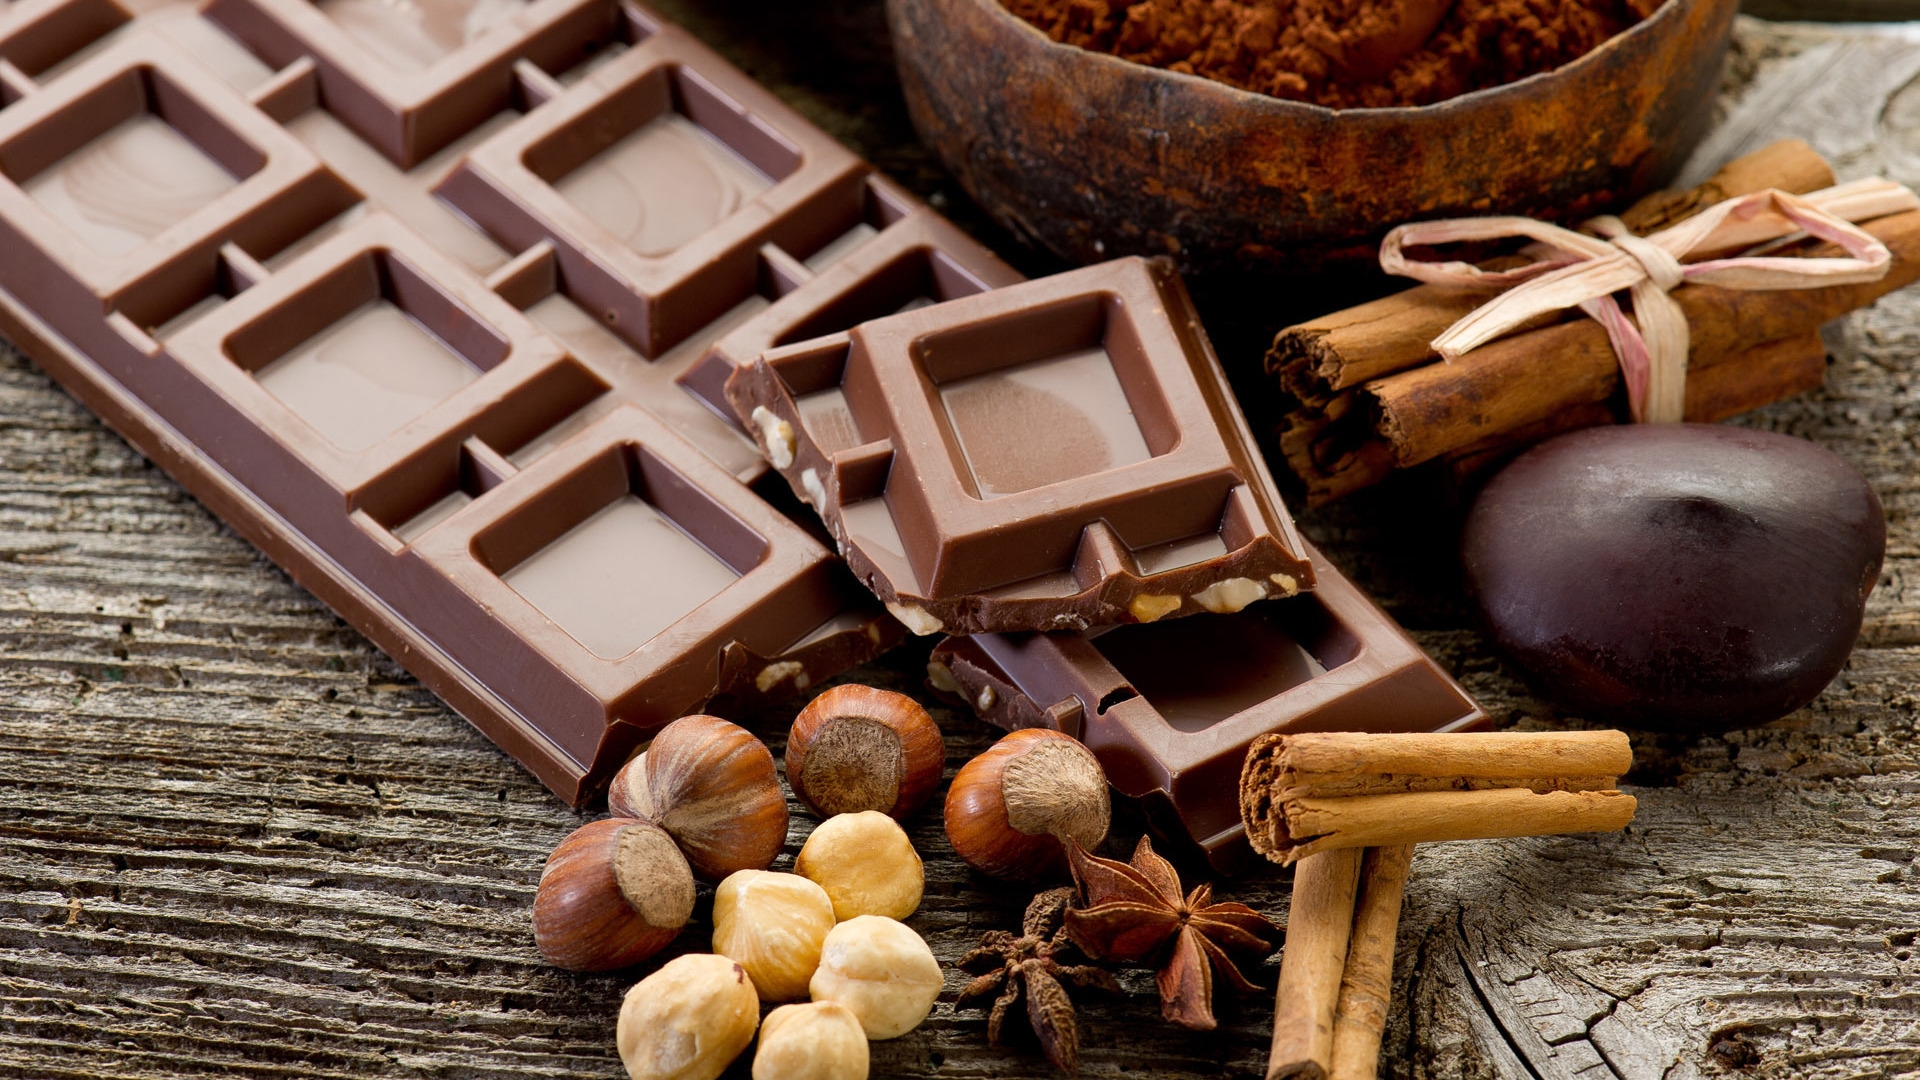 Chocolate and Cinnamon and Nuts for 1920 x 1080 HDTV 1080p resolution